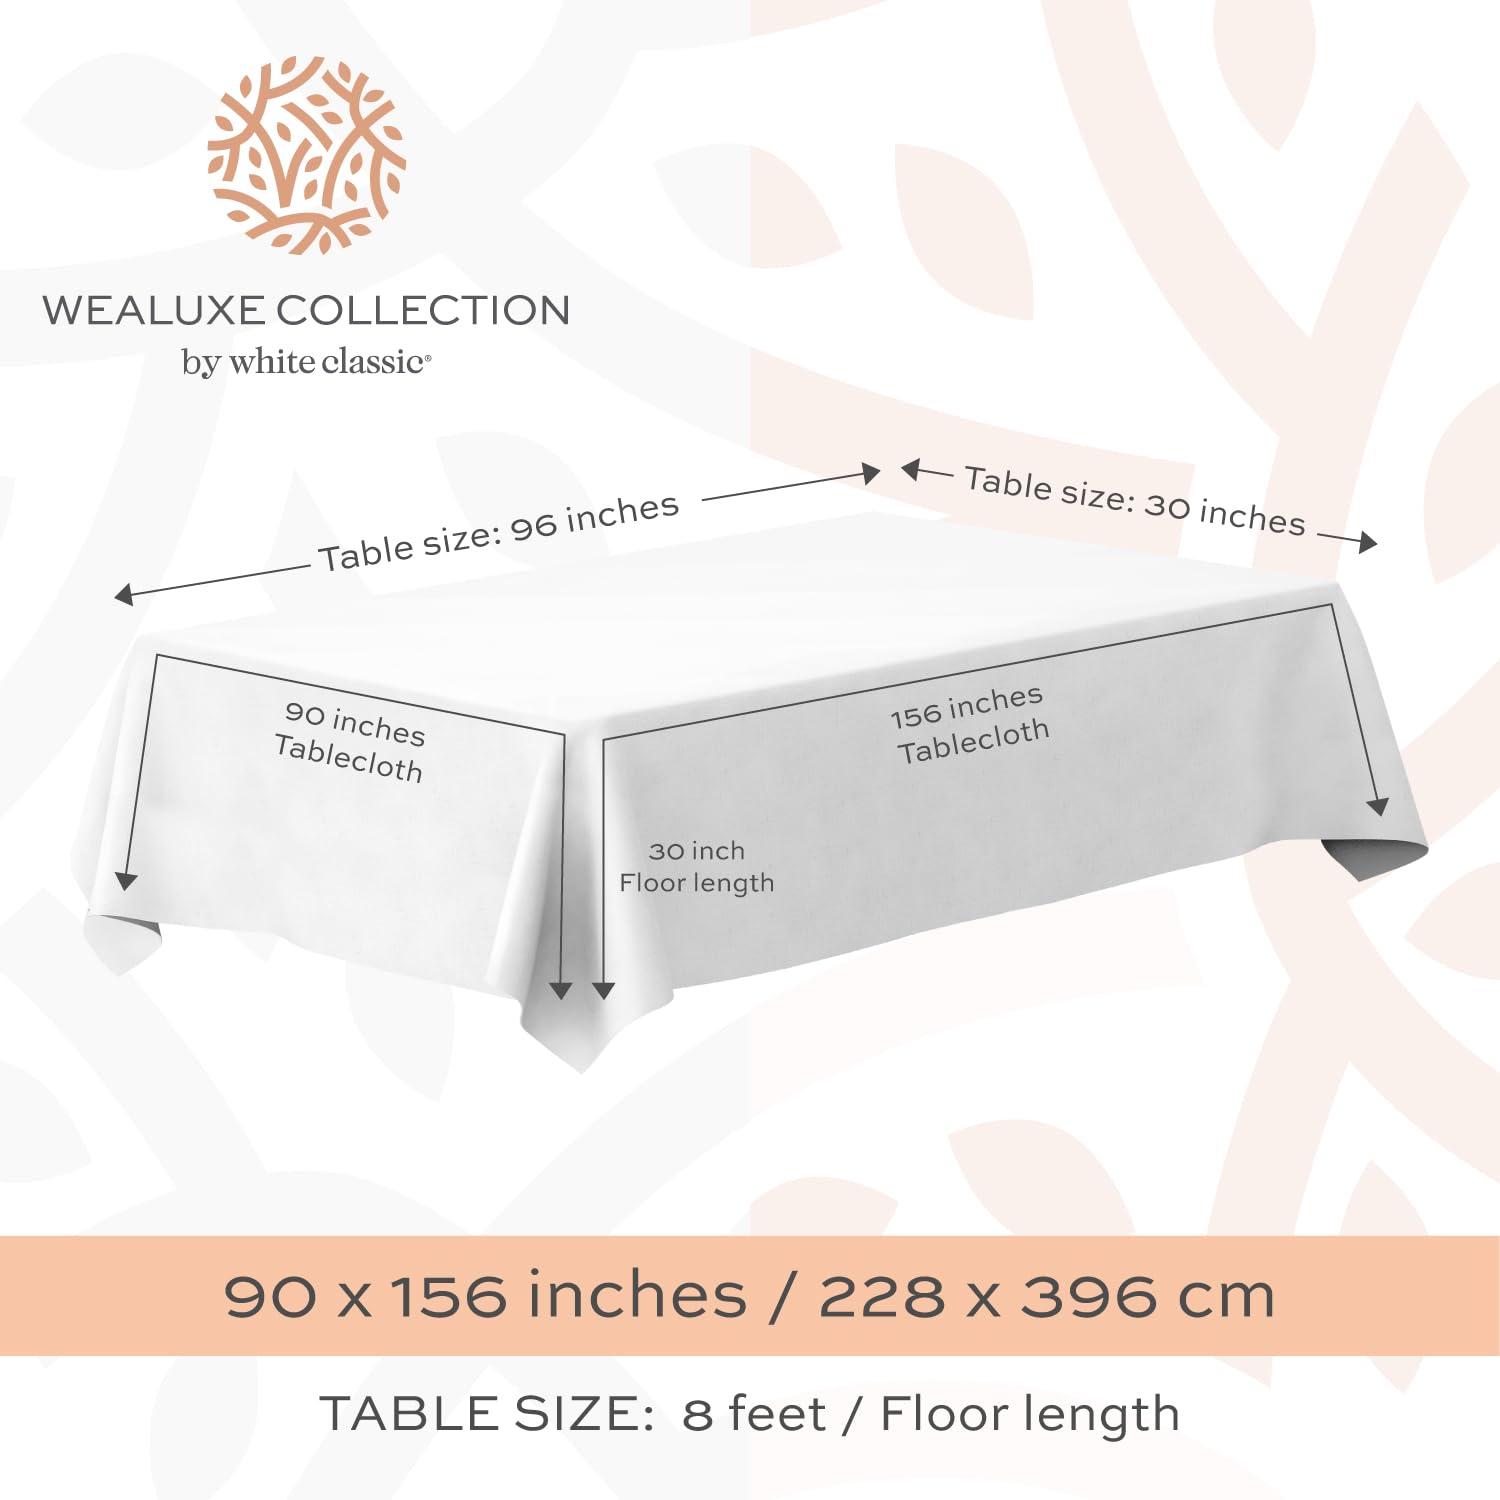 Classic White Tablecloth 90x156 - White Table Clothes for 8 Foot Rectangle Tables, 200 GSM Stain and Wrinkle Resistant Washable Fabric [2 Pack]  - Very Good